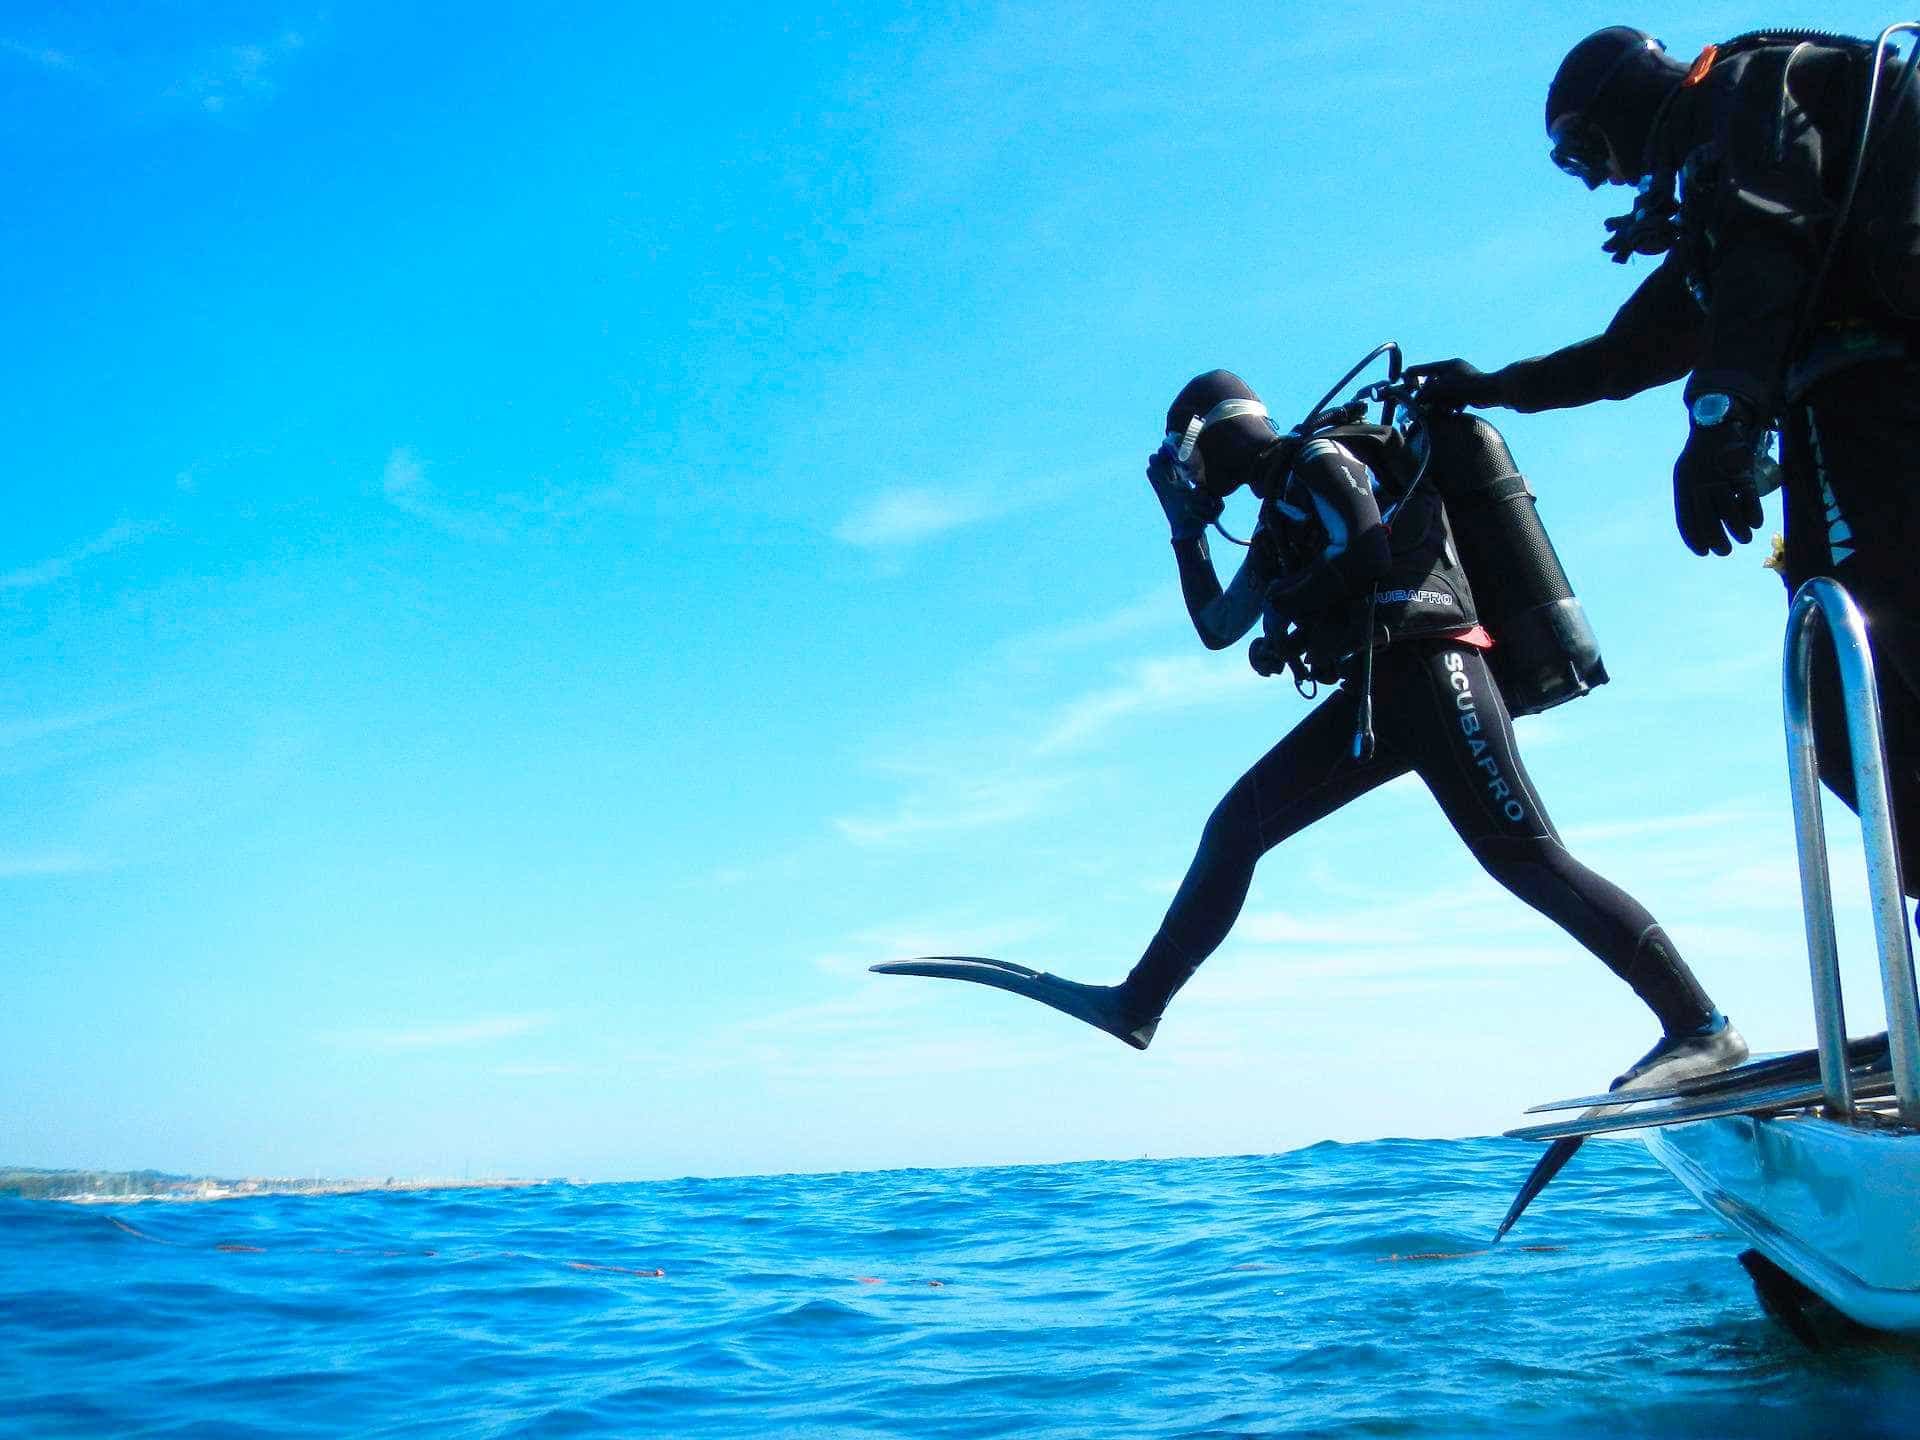 Scuba diver jumping off of boat.